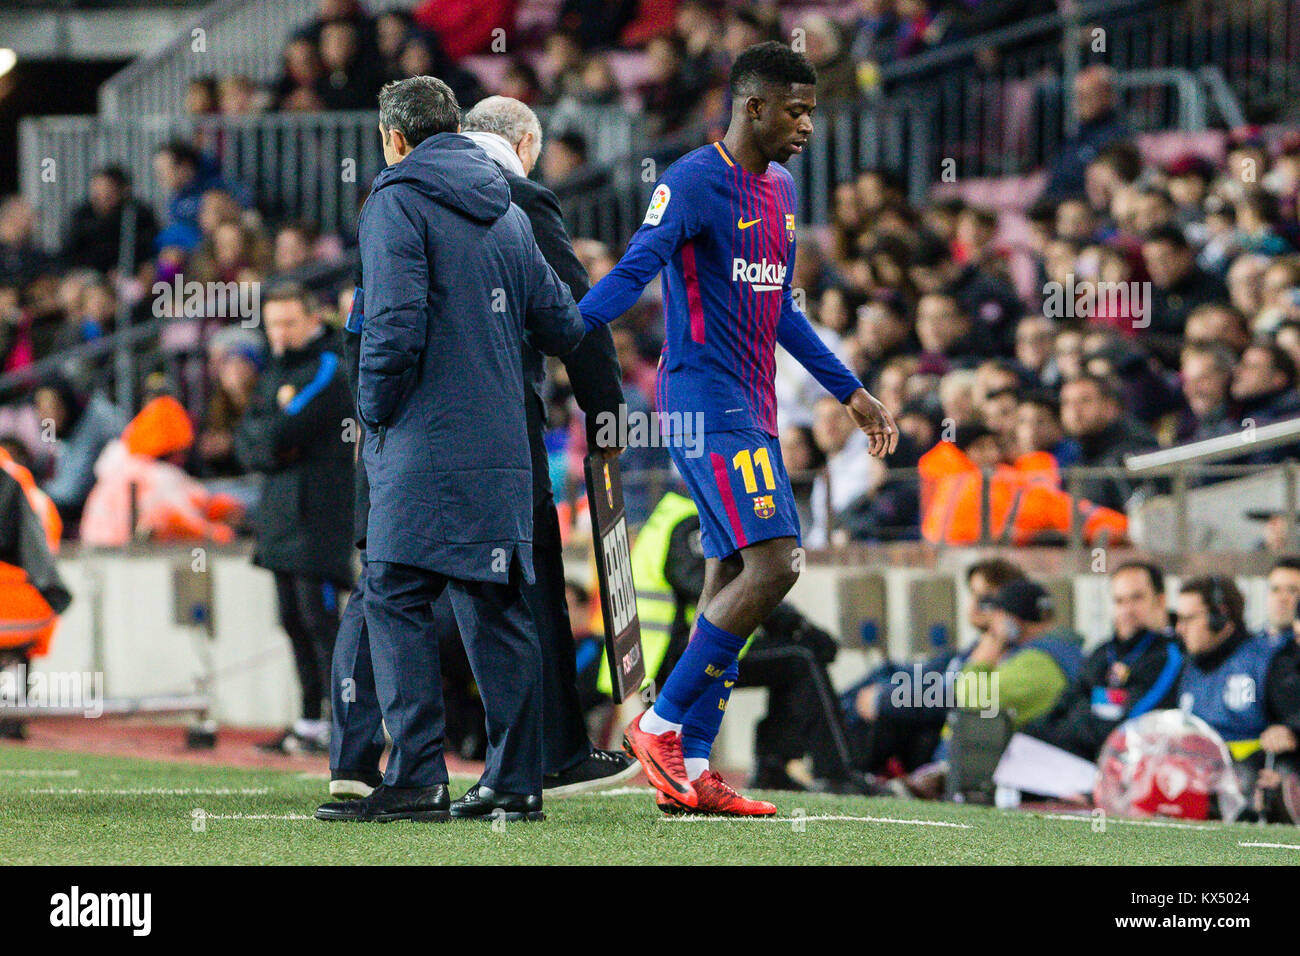 Barcelona, Spain. 07th Jan, 2018. FC Barcelona forward Ousmane Dembele (11) during the match between FC Barcelona against Levante UD, for the round 18 of the Liga Santander, played at Camp Nou Stadium on 7th January 2018 in Barcelona, Spain. (Credit: GTO/Urbanandsport/Gtres Online) Credit: Gtres Información más Comuniación on line, S.L./Alamy Live News Stock Photo